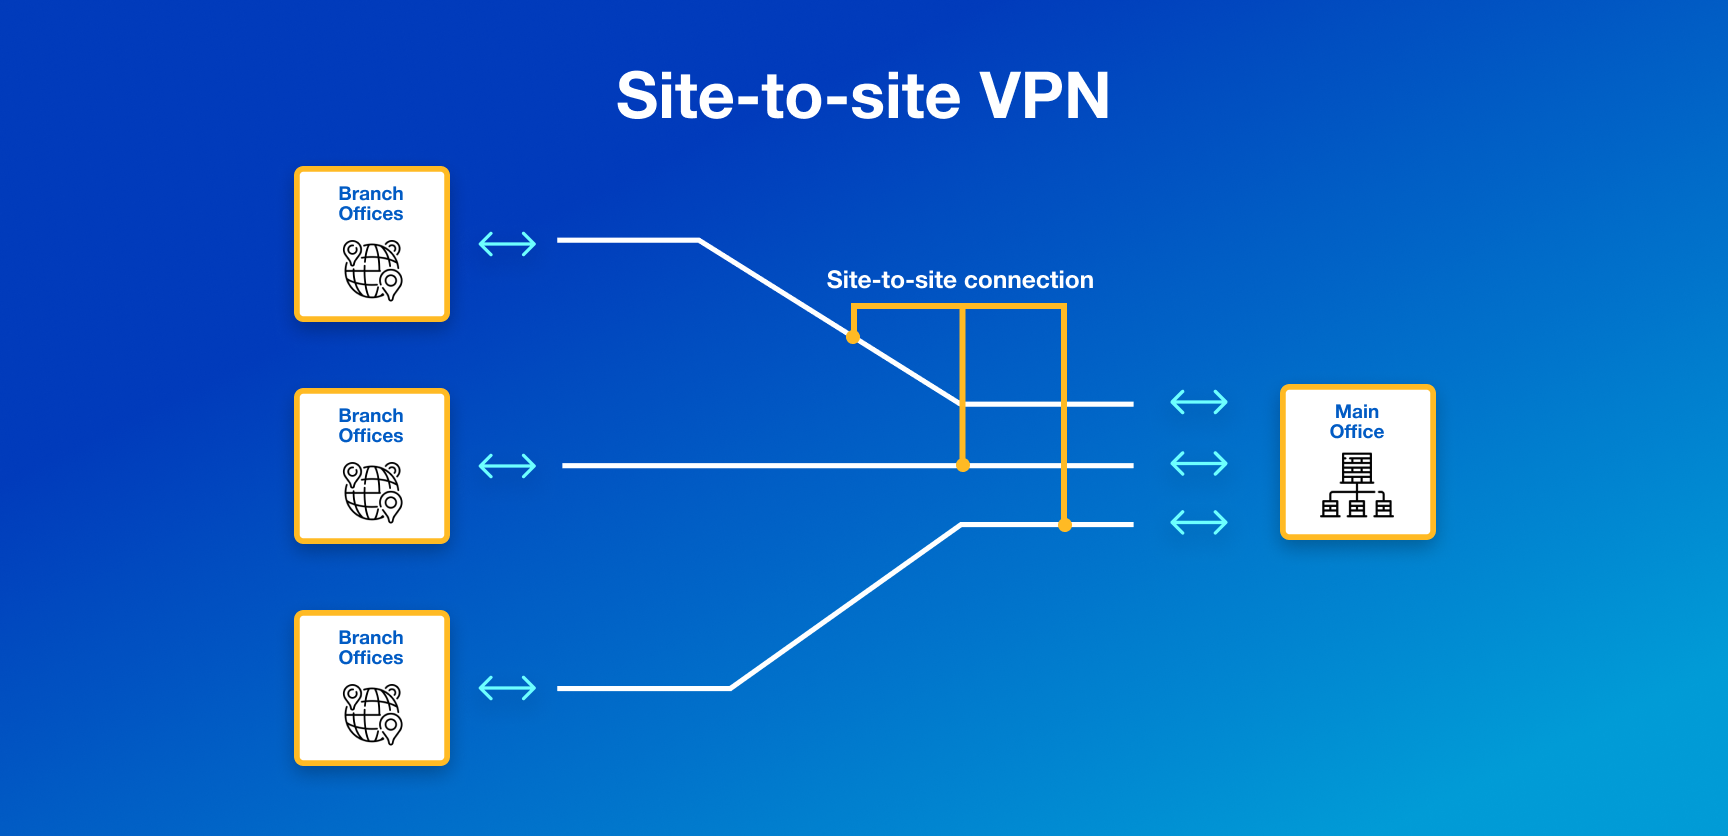 How to Set Up a Site to Site VPN